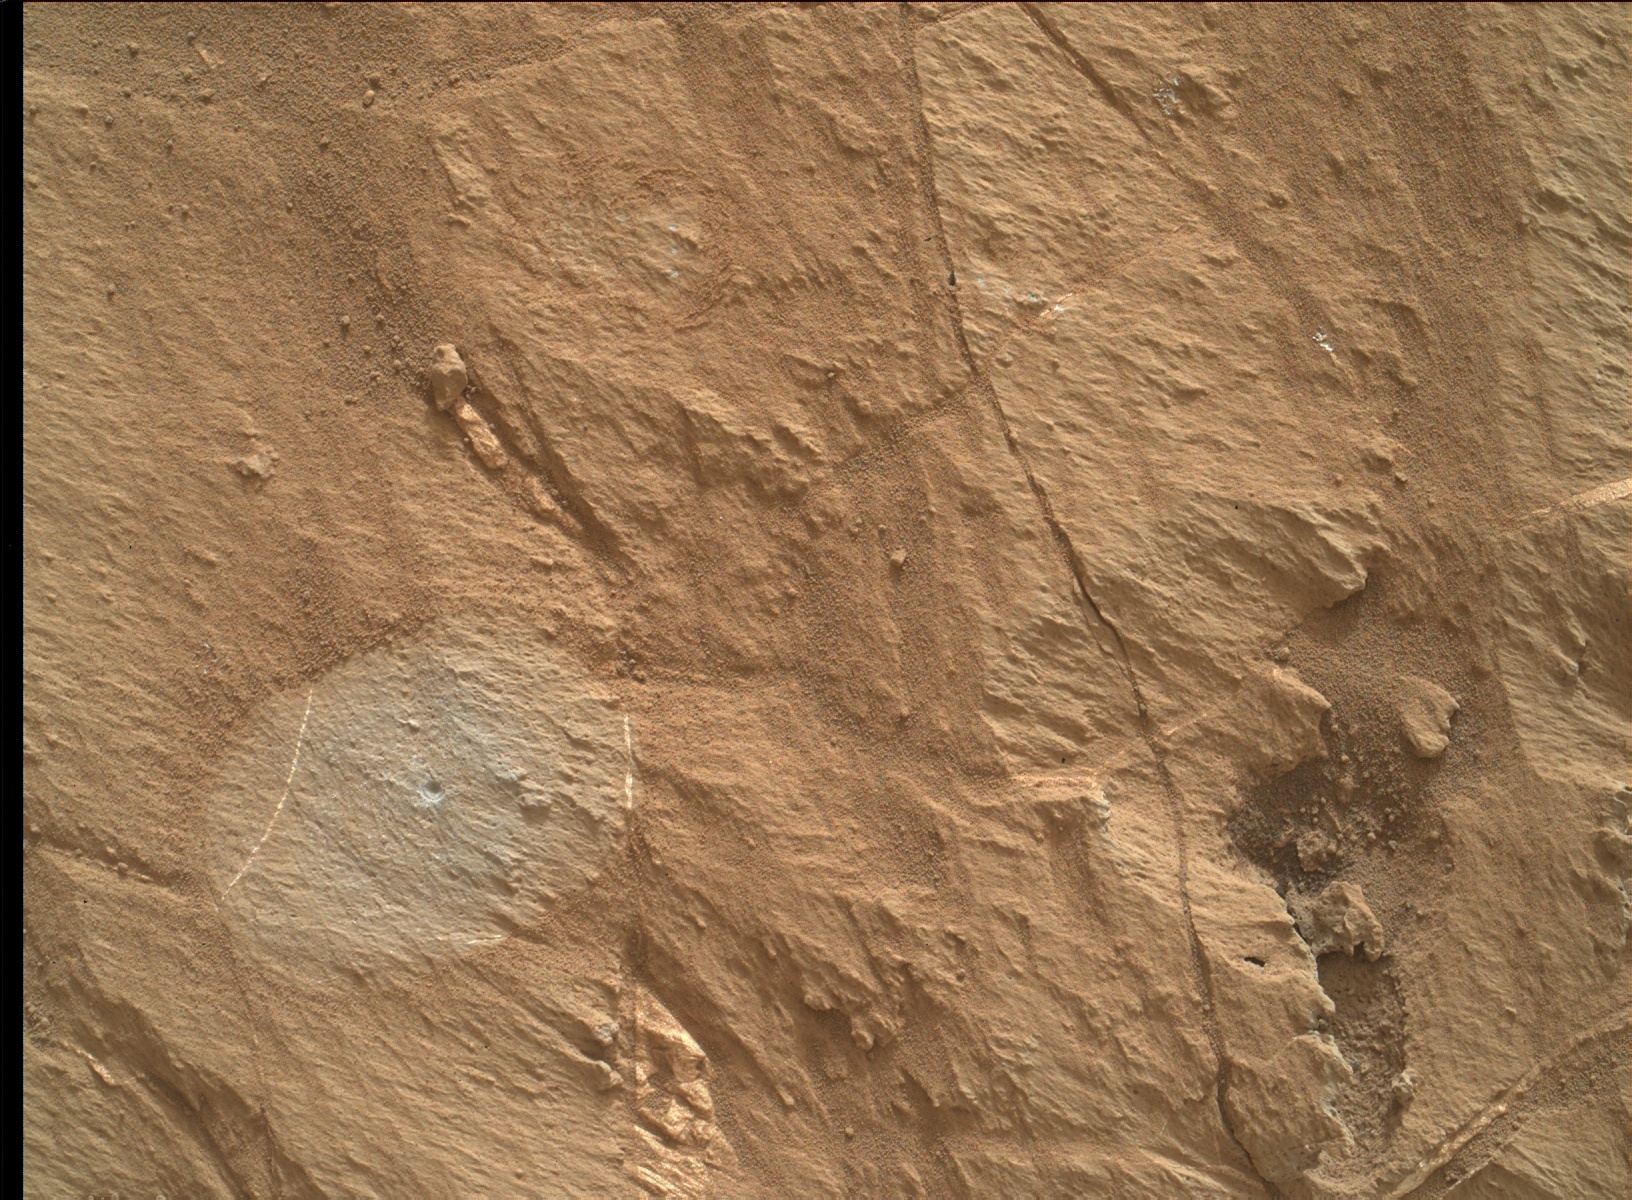 Nasa's Mars rover Curiosity acquired this image using its Mars Hand Lens Imager (MAHLI) on Sol 1057